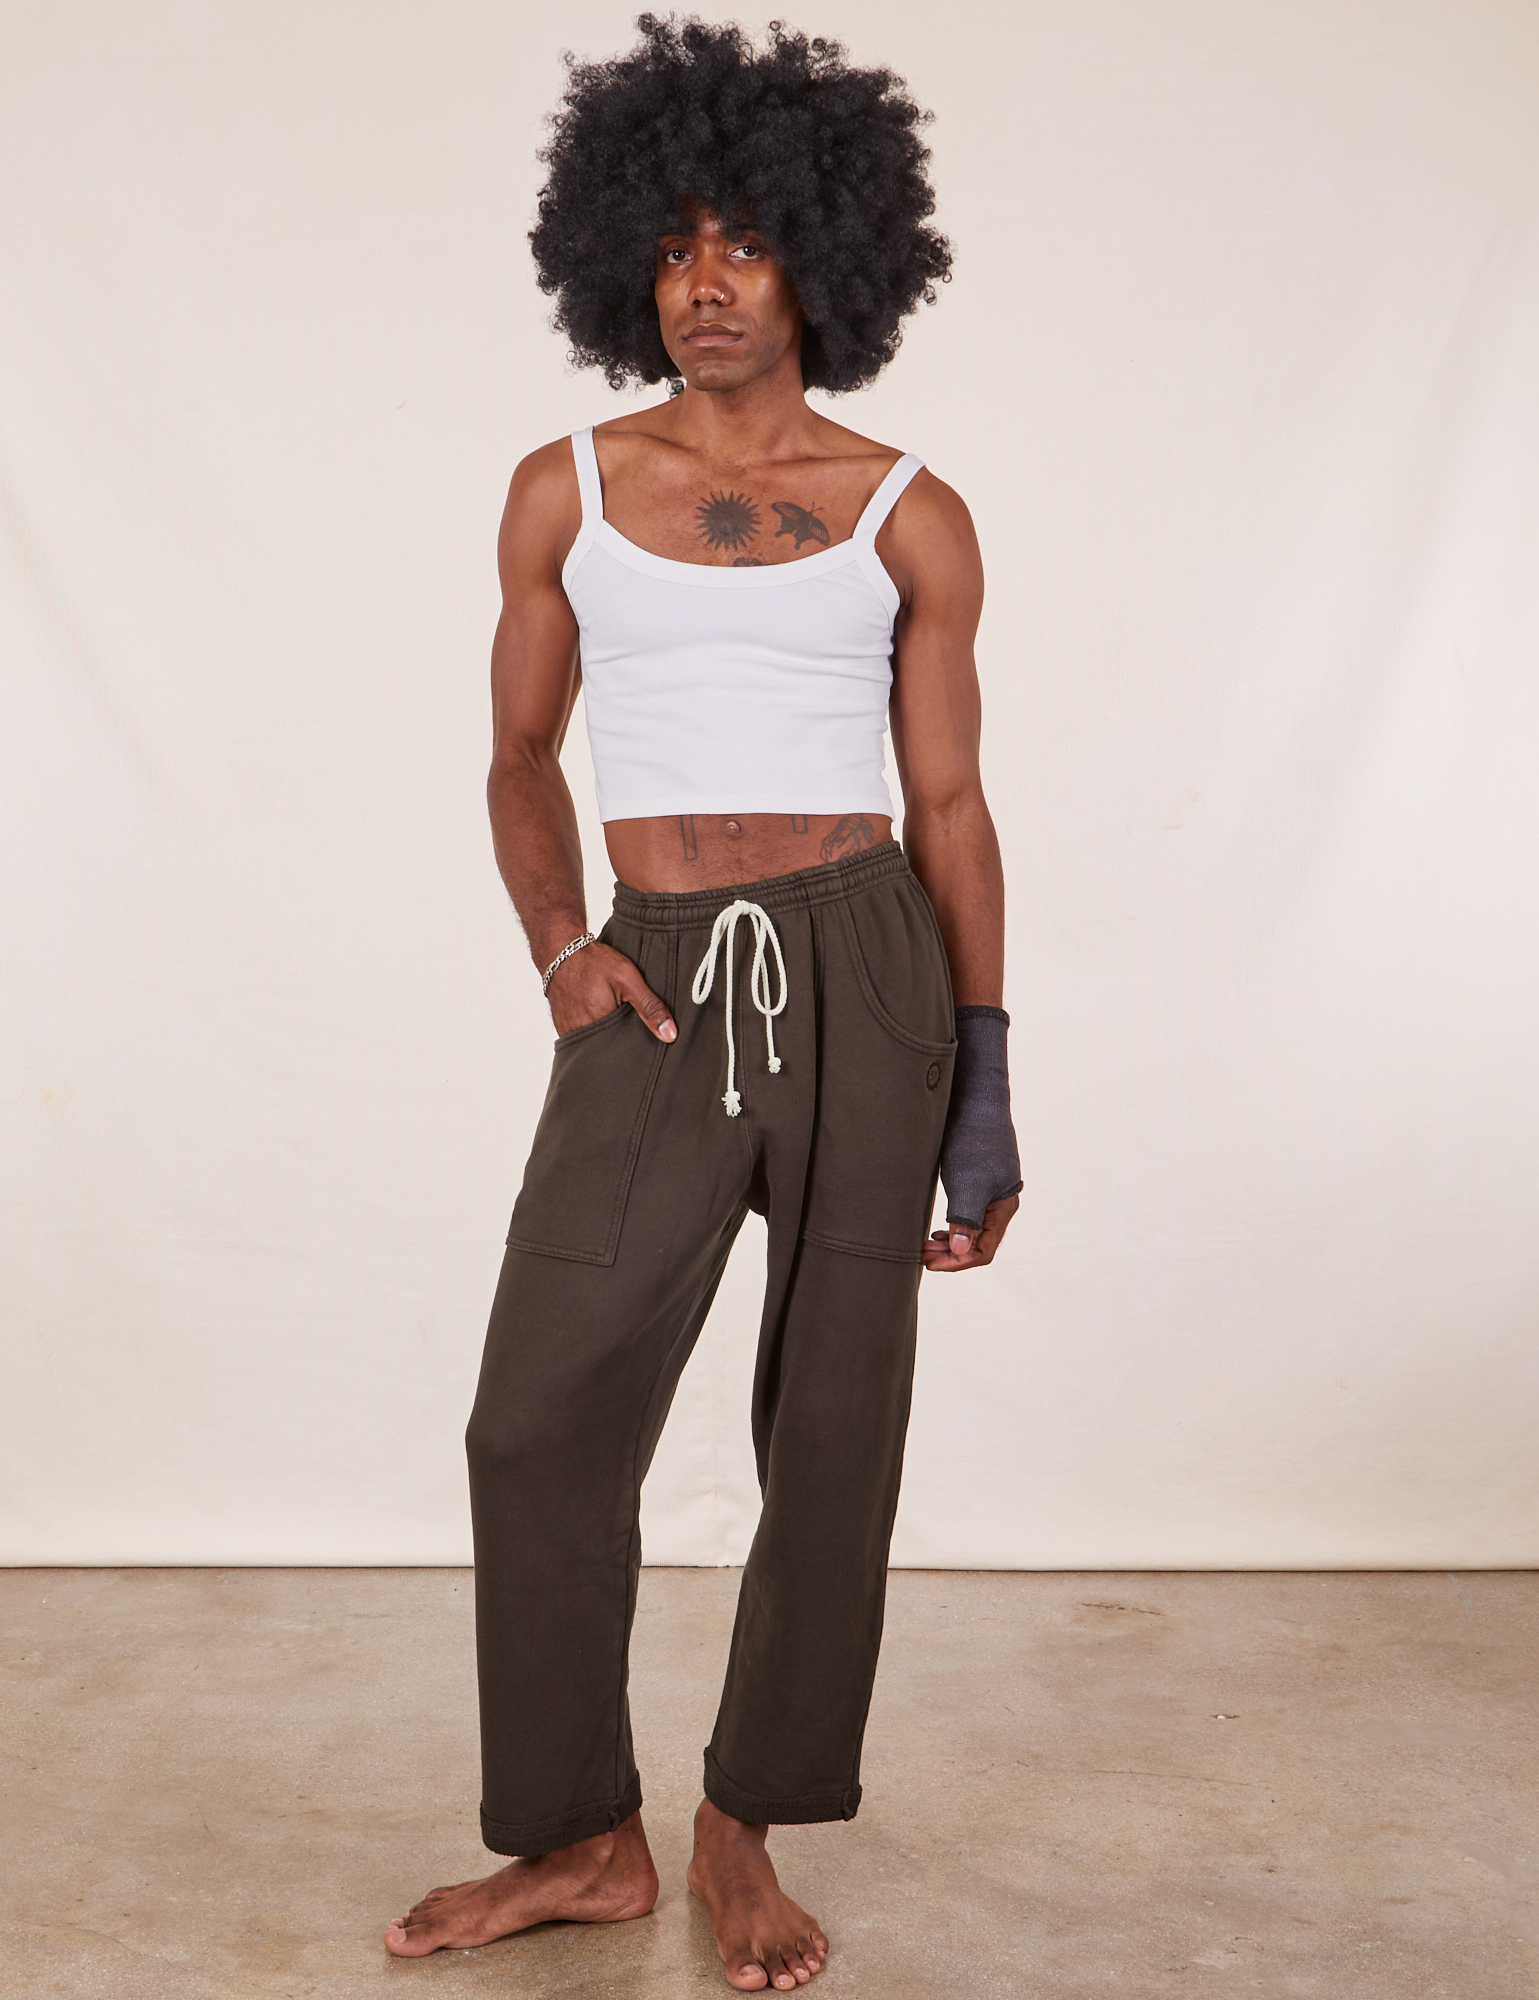 Jerrod is 6&#39;3&quot; and wearing M Cropped Rolled Cuff Sweatpants in Espresso Brown vintage off-white Cami